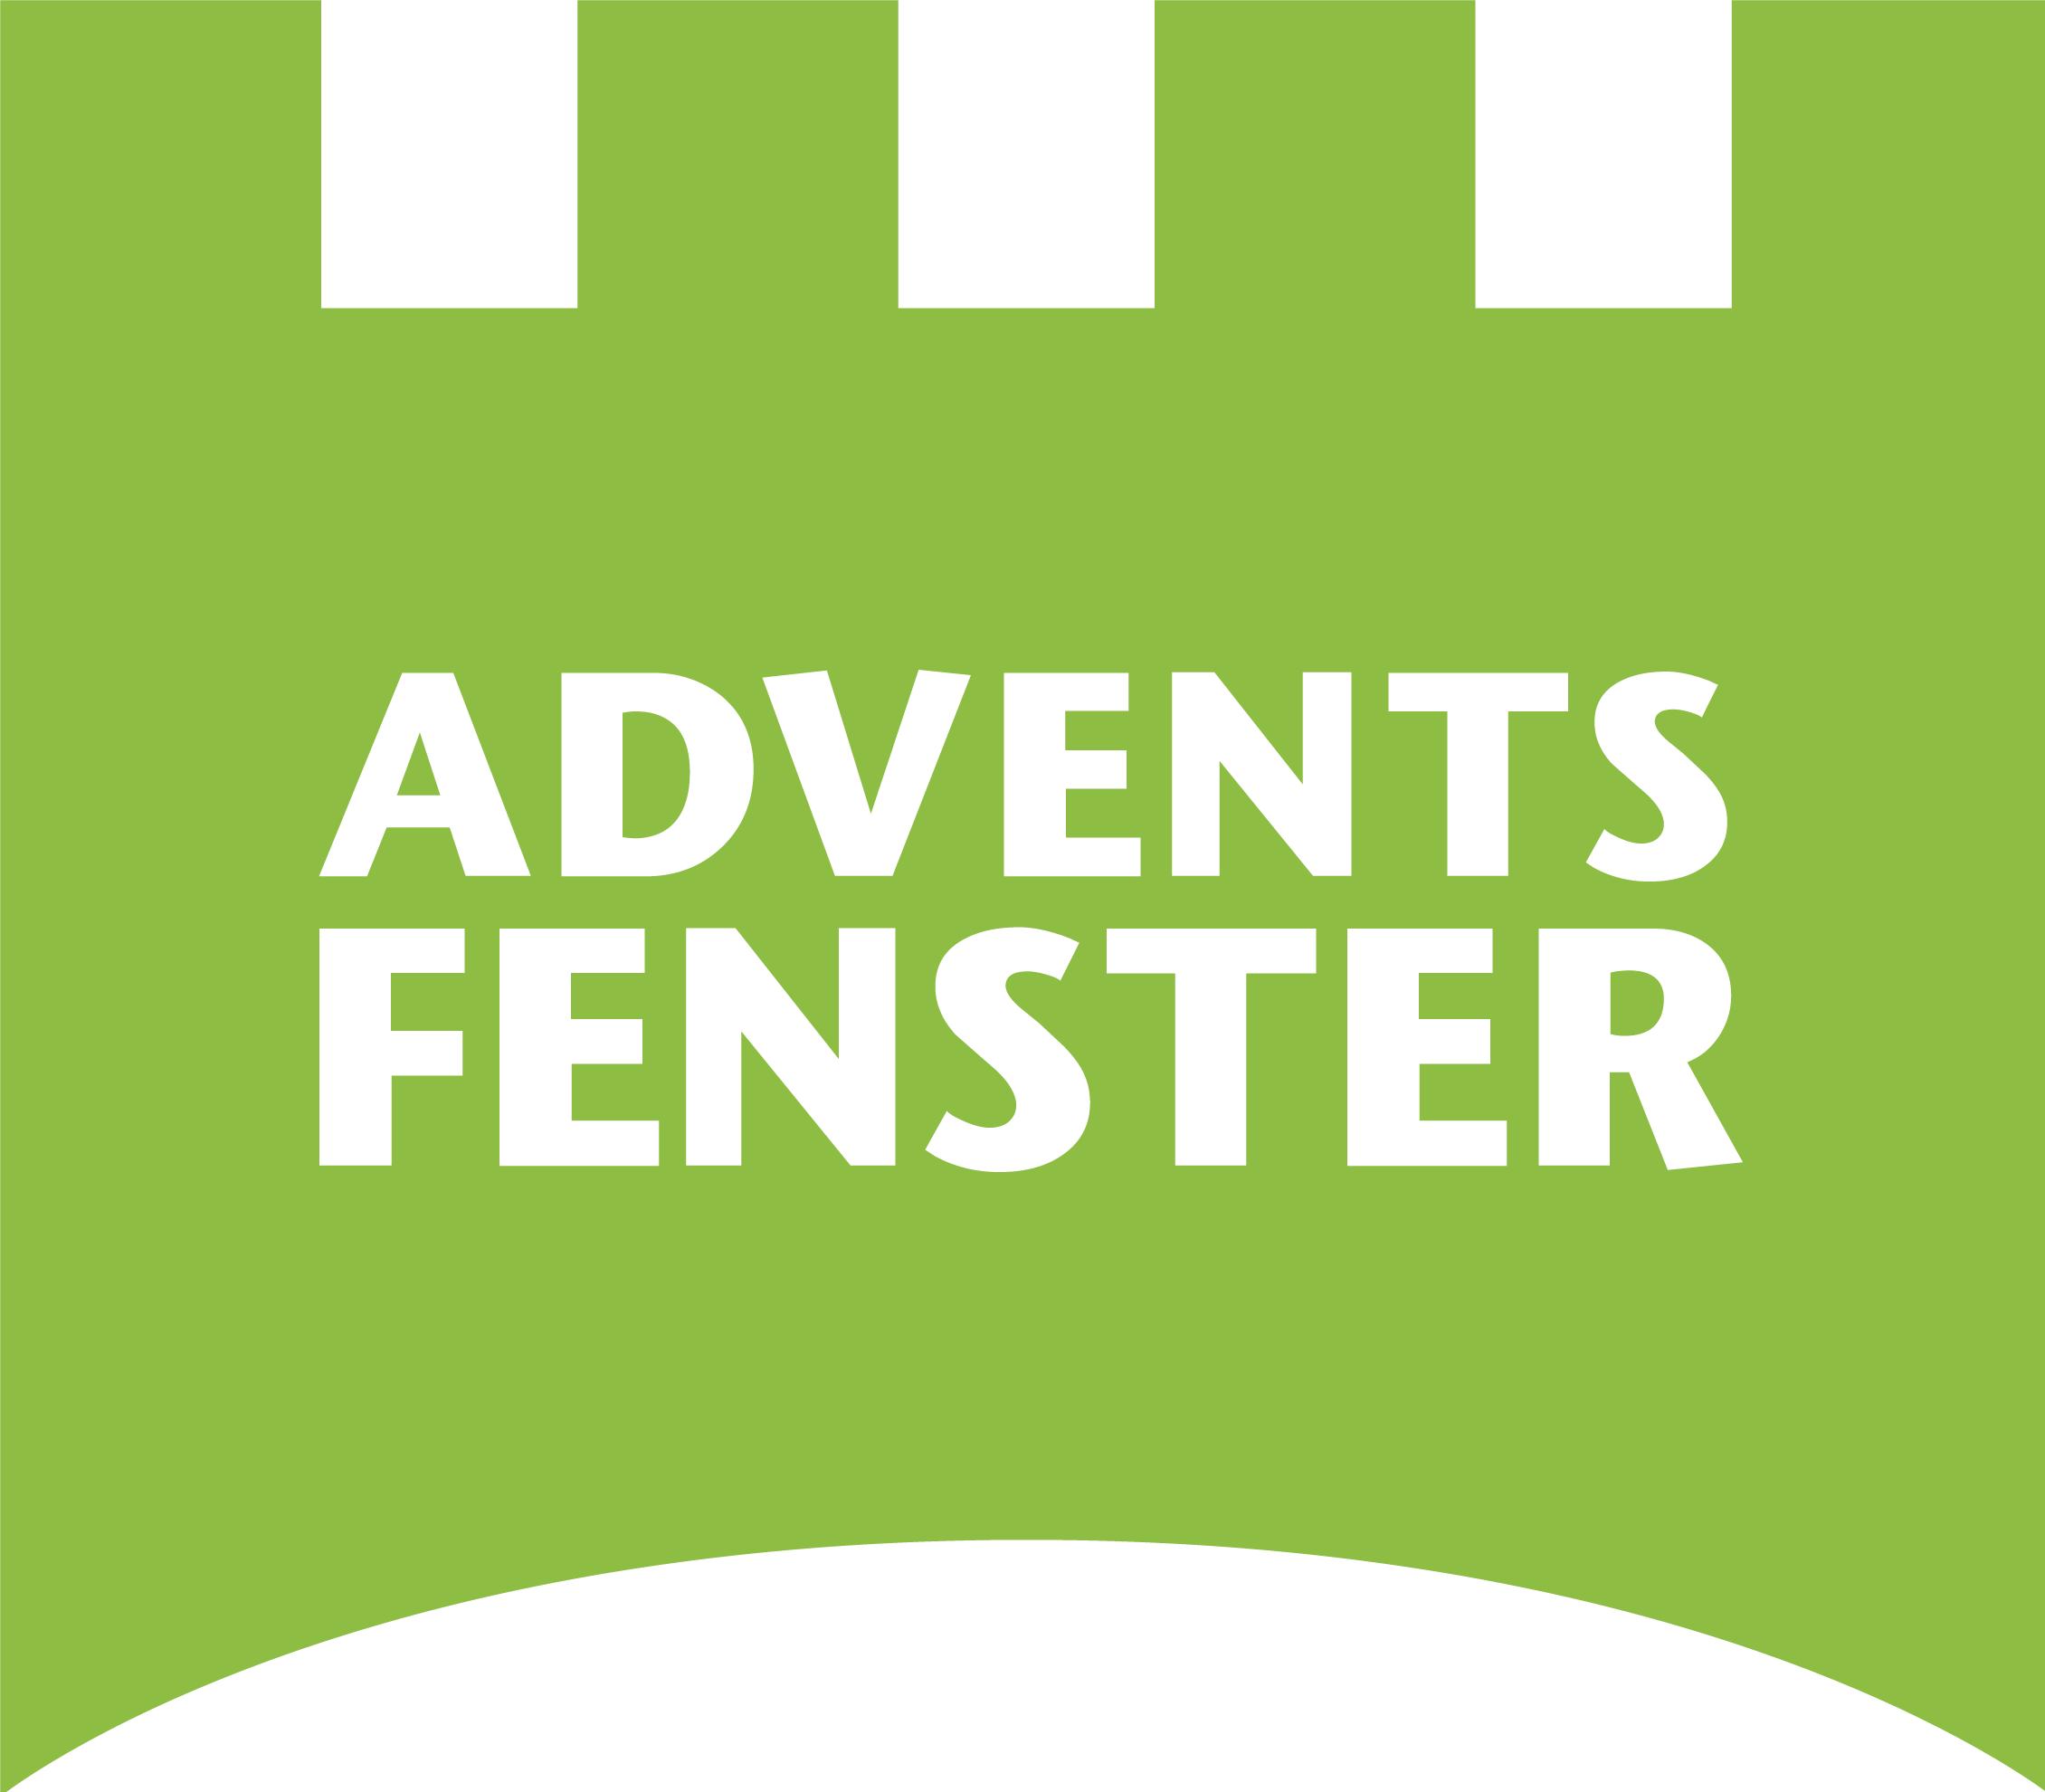 Advents-Fenster